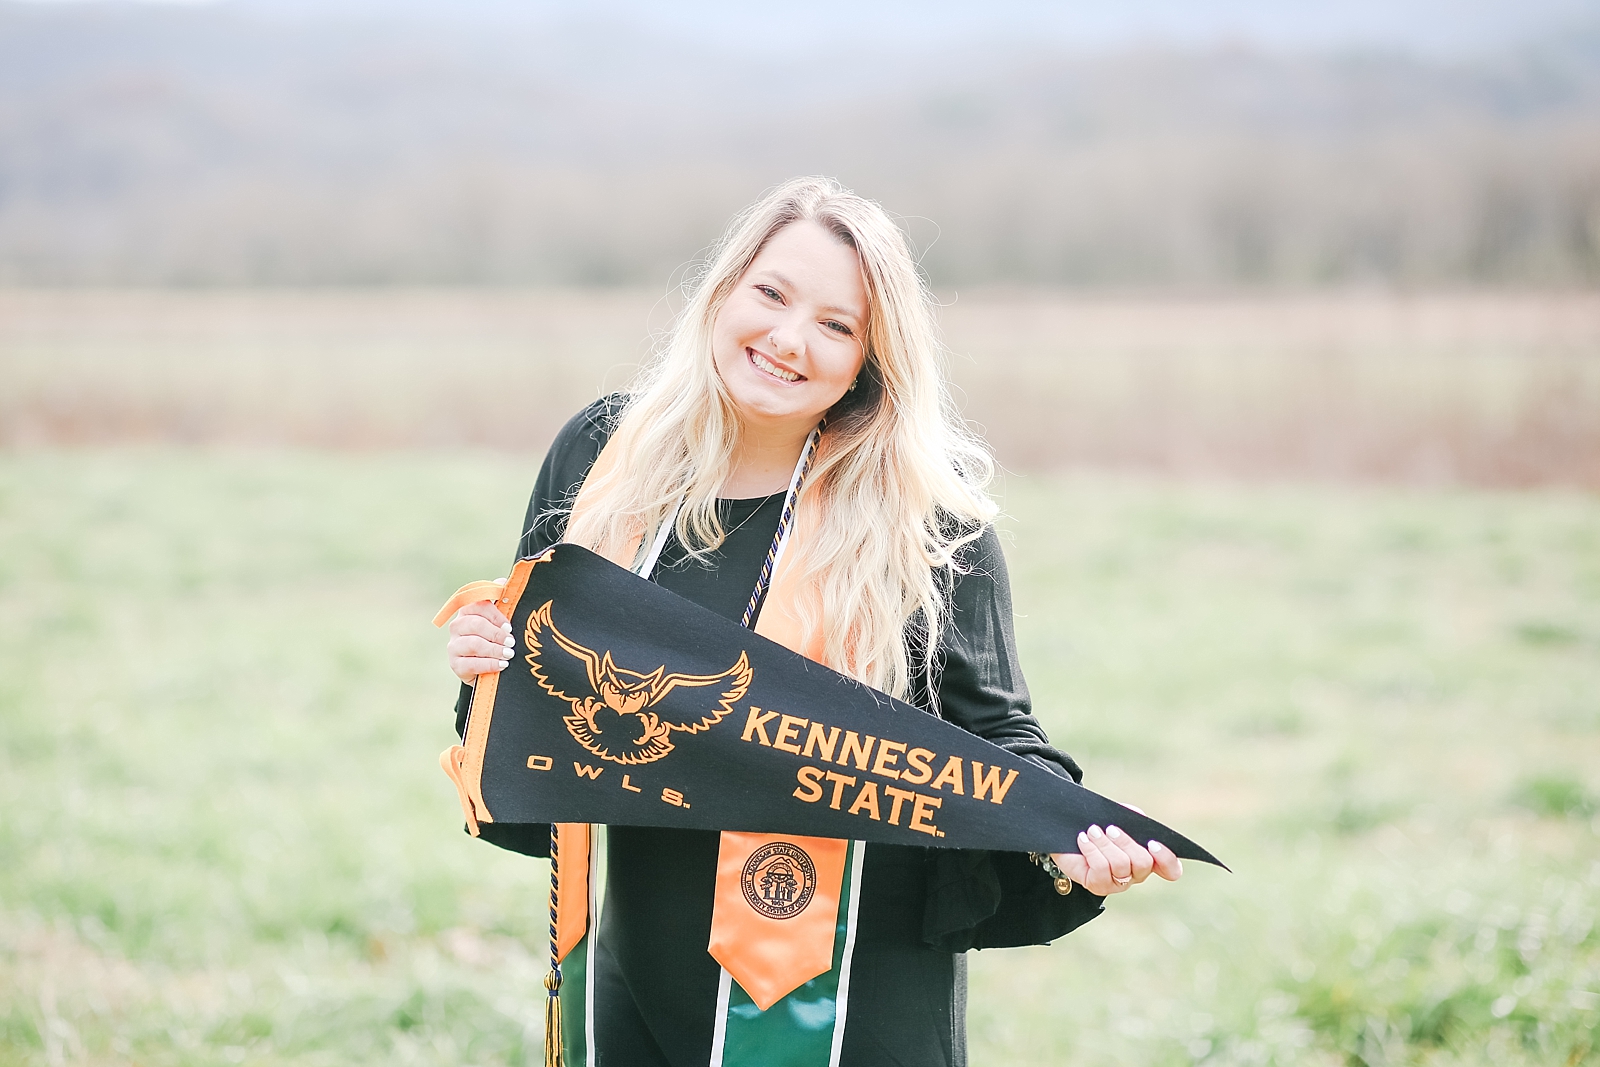 Kennesaw State University Senior Session Graduate holding pennant smiling at the camera photo